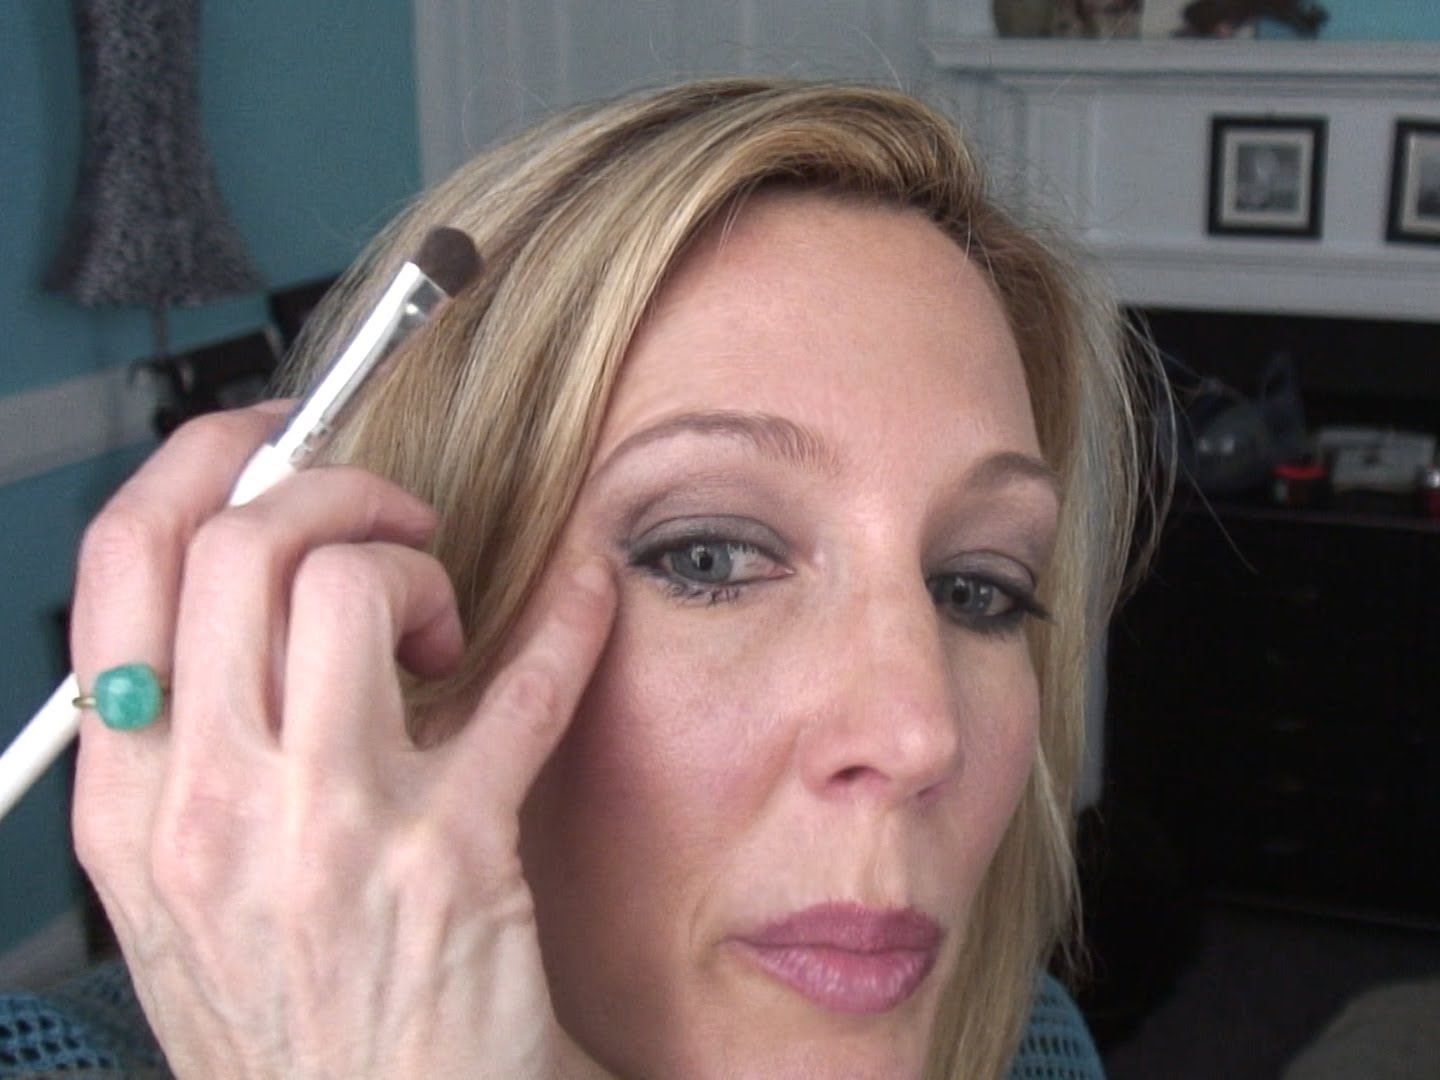 Eye Makeup For Over 50 Smokey Eye Tutorial For Women Over 50 With Hooded Crepey Eyelids